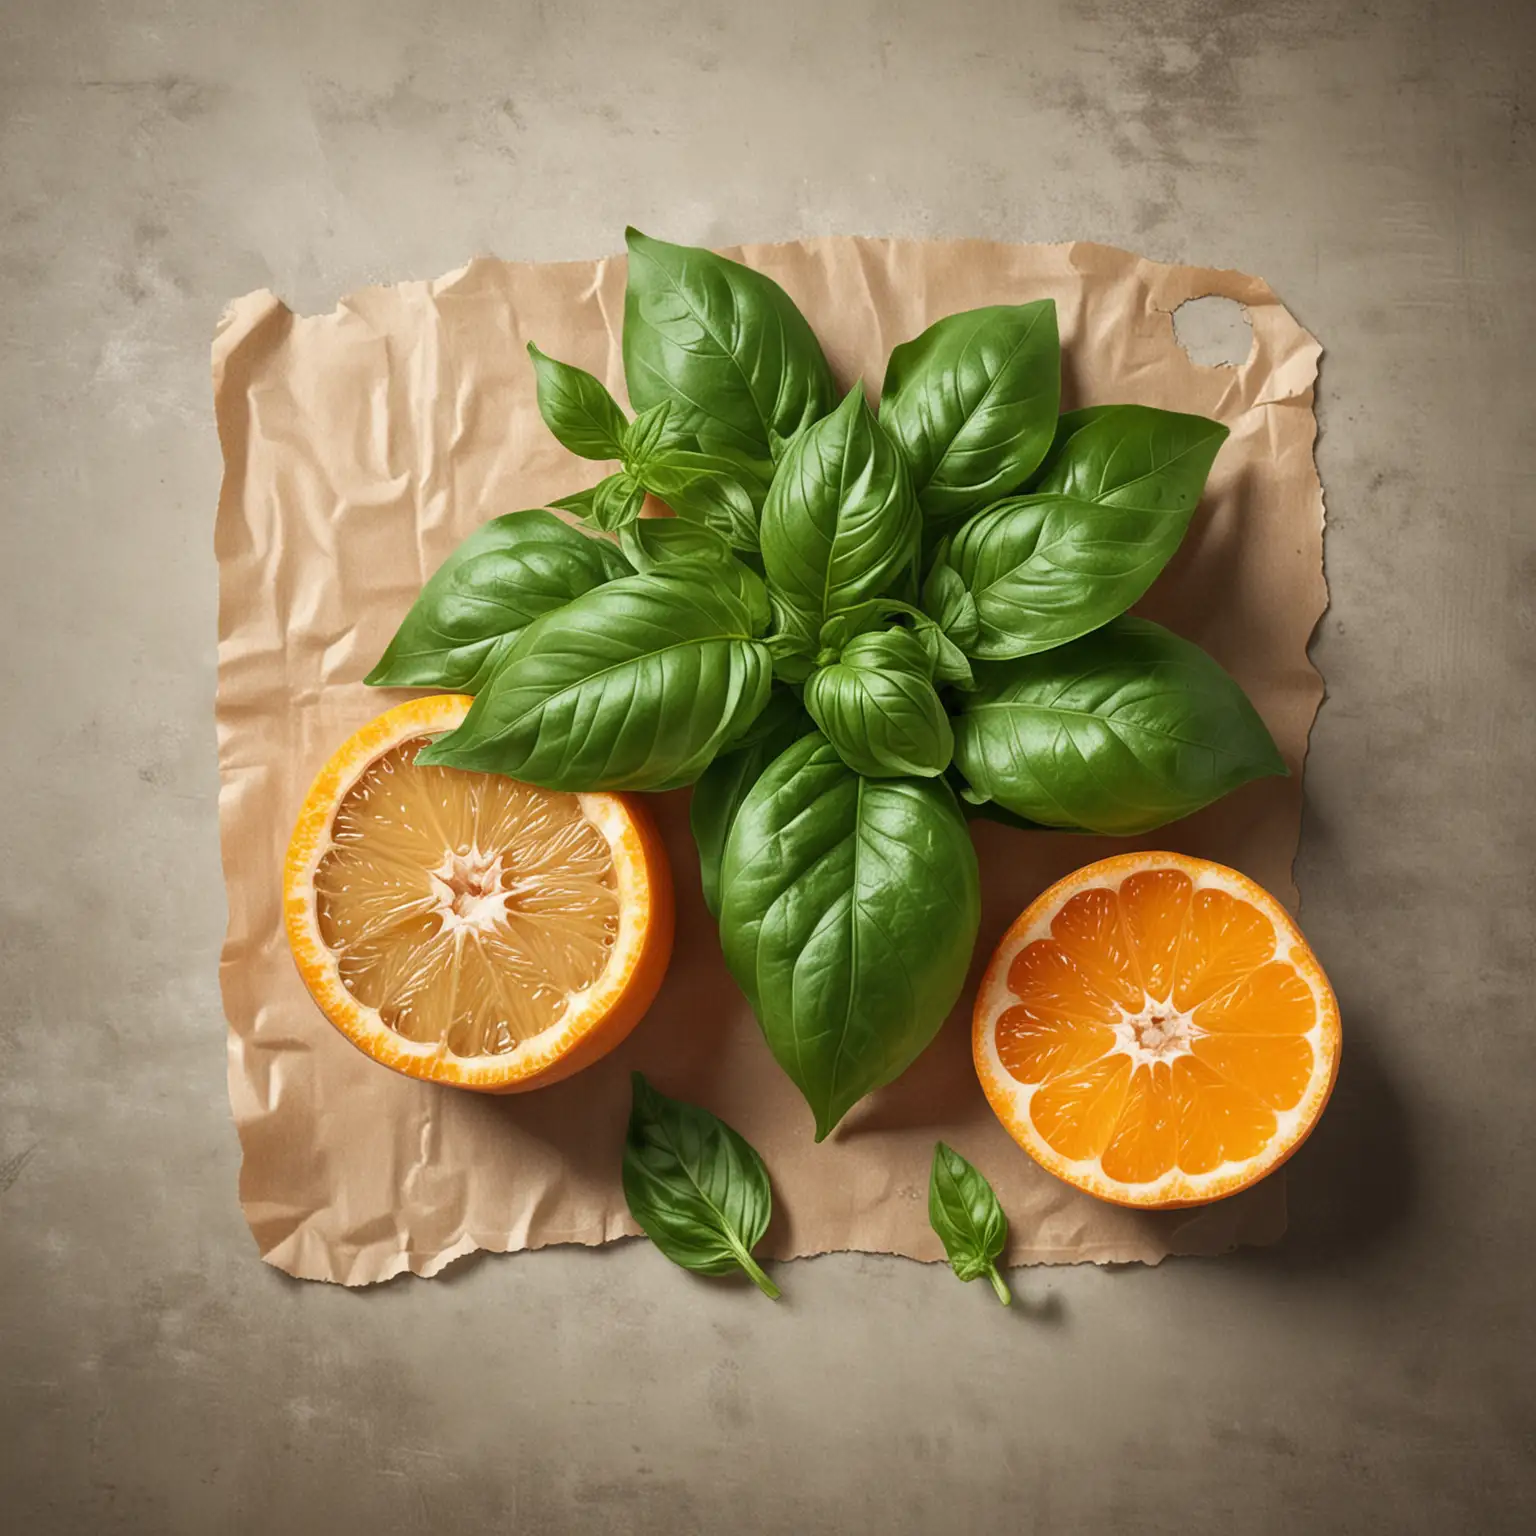 create a realistic image showing a bunch of basil and a the skin of a peeled mandarin

